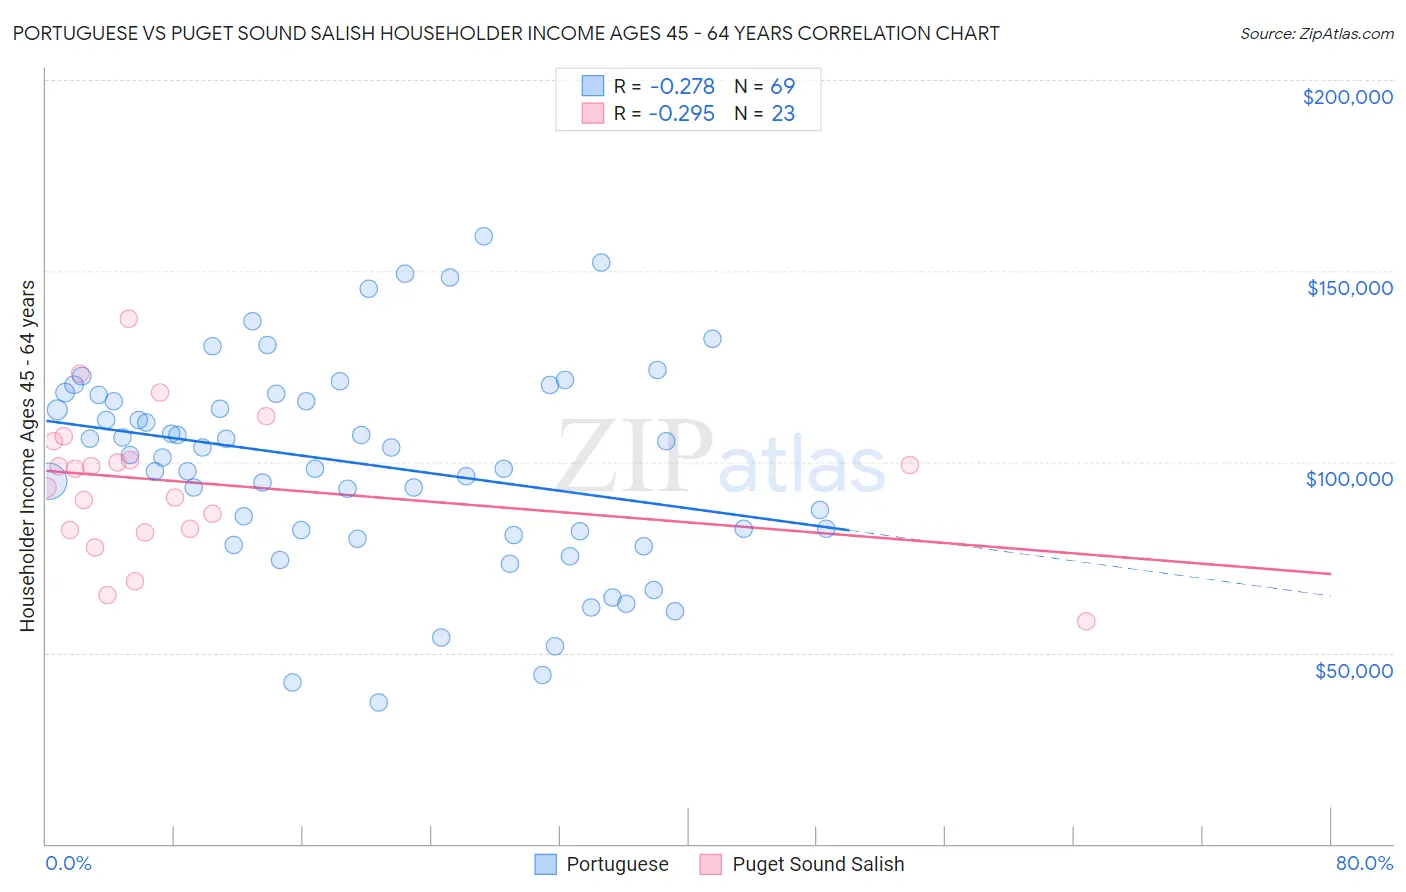 Portuguese vs Puget Sound Salish Householder Income Ages 45 - 64 years